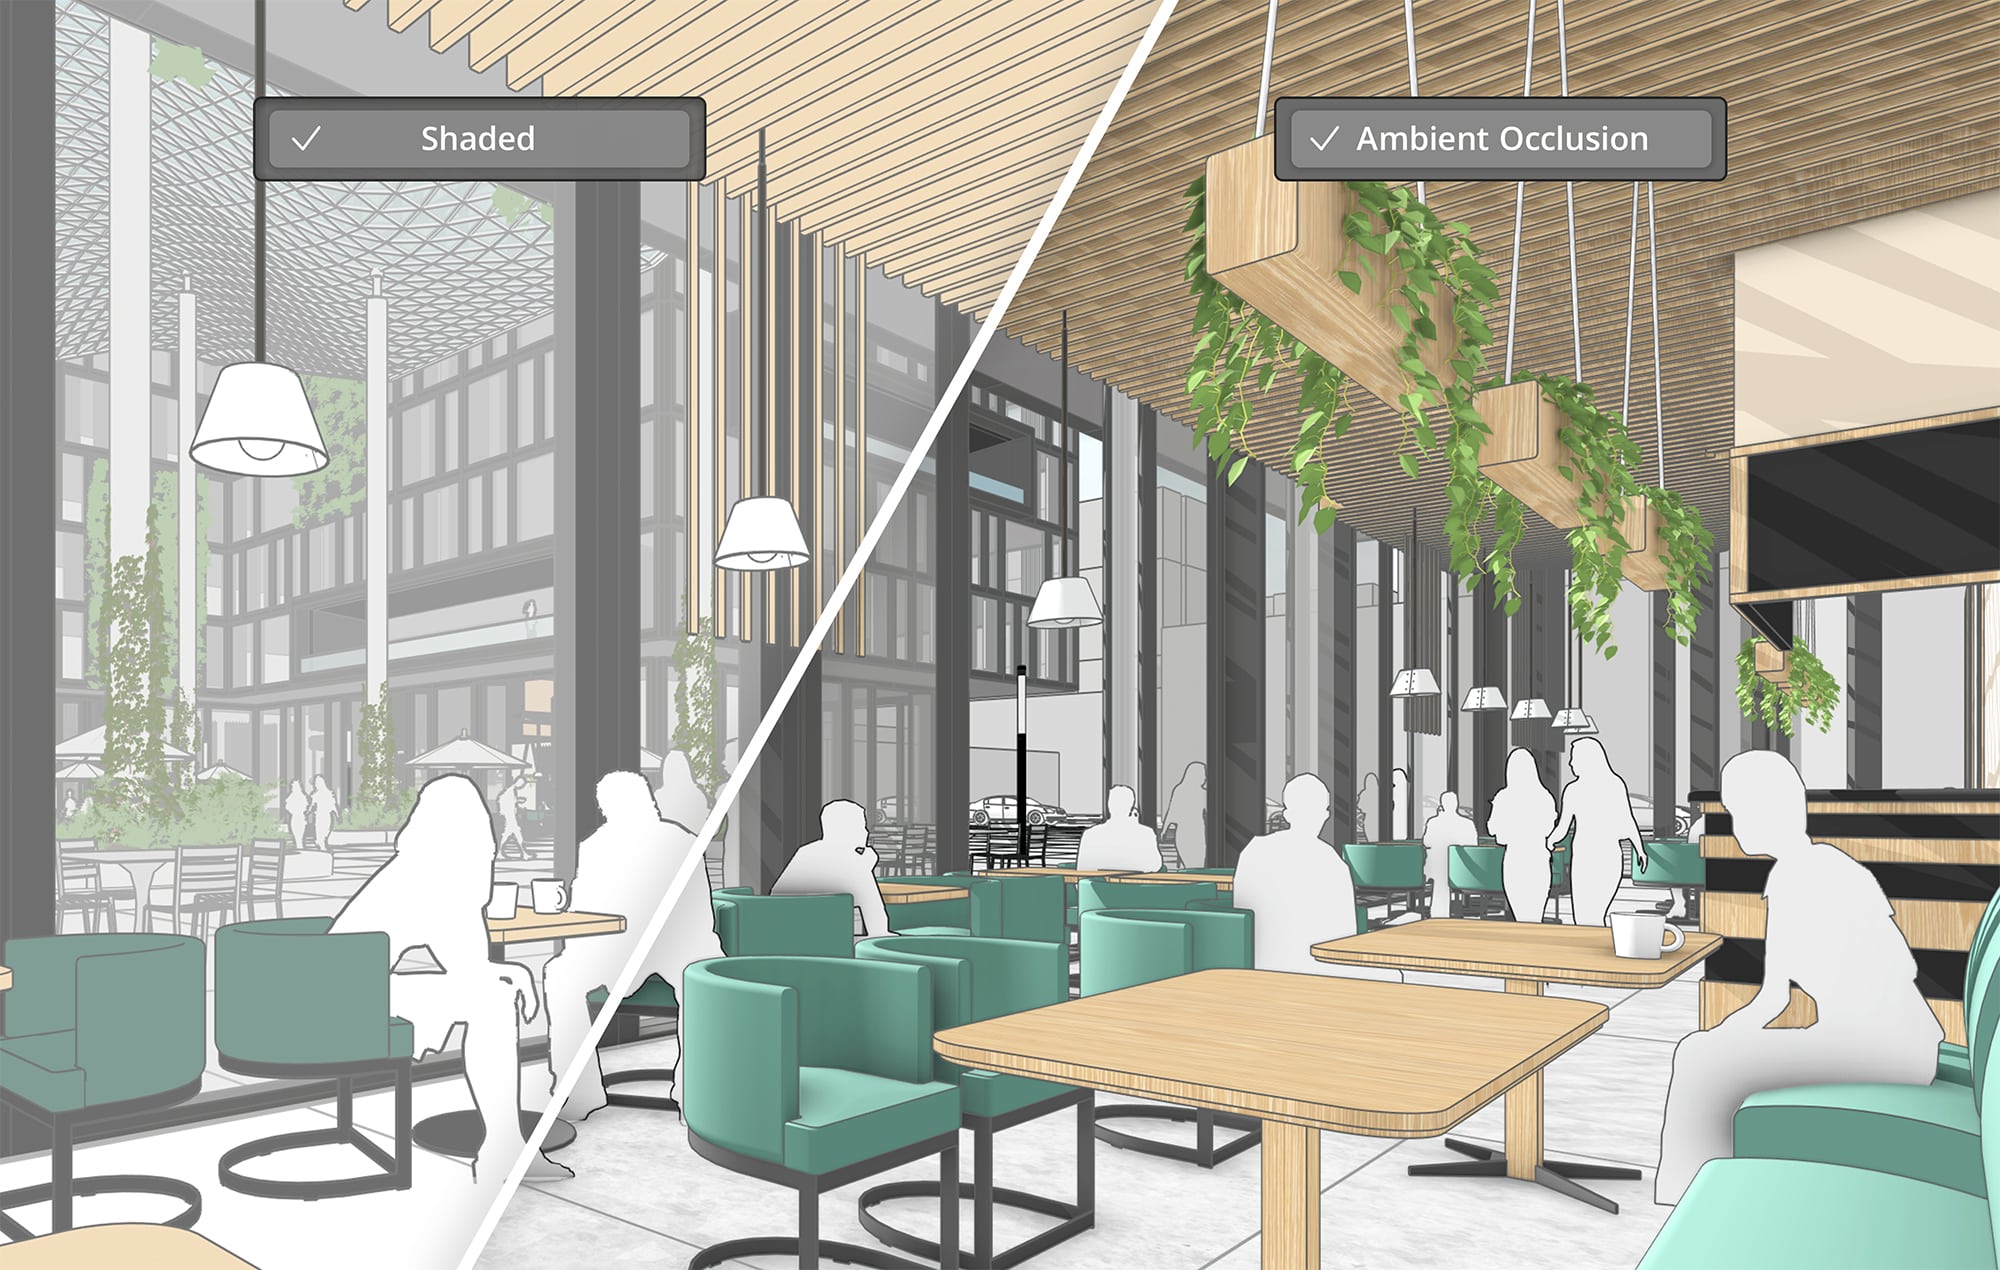 The first image shows a scene in SketchUp of a modern cafe with people sitting down enjoying coffee. The second image is the same screen with Ambient Occlusion turned on.